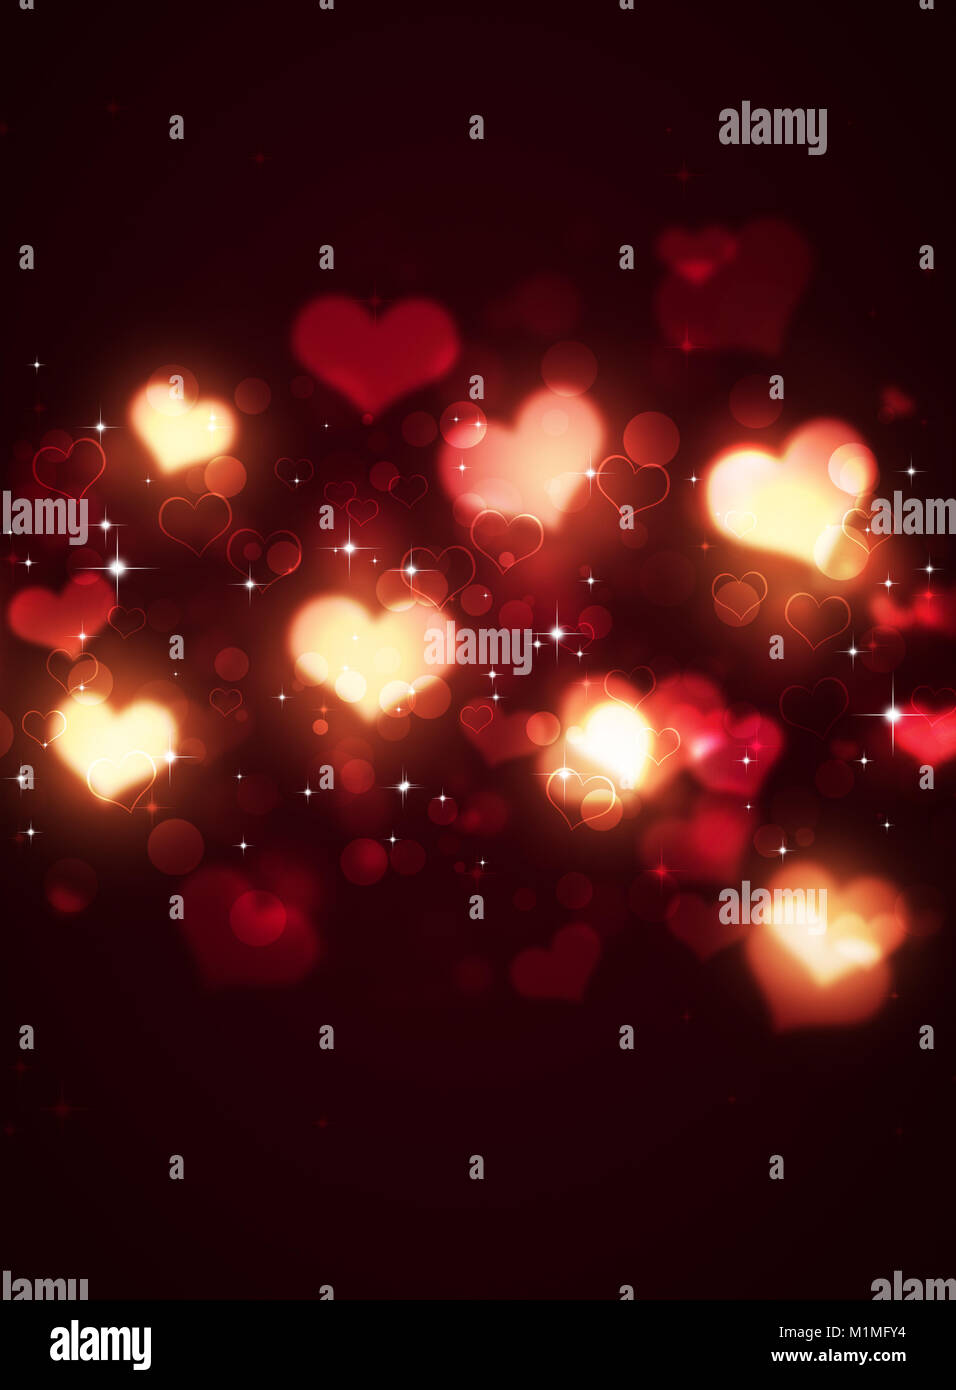 valentine holiday background with blurry heart shape lights Stock Photo